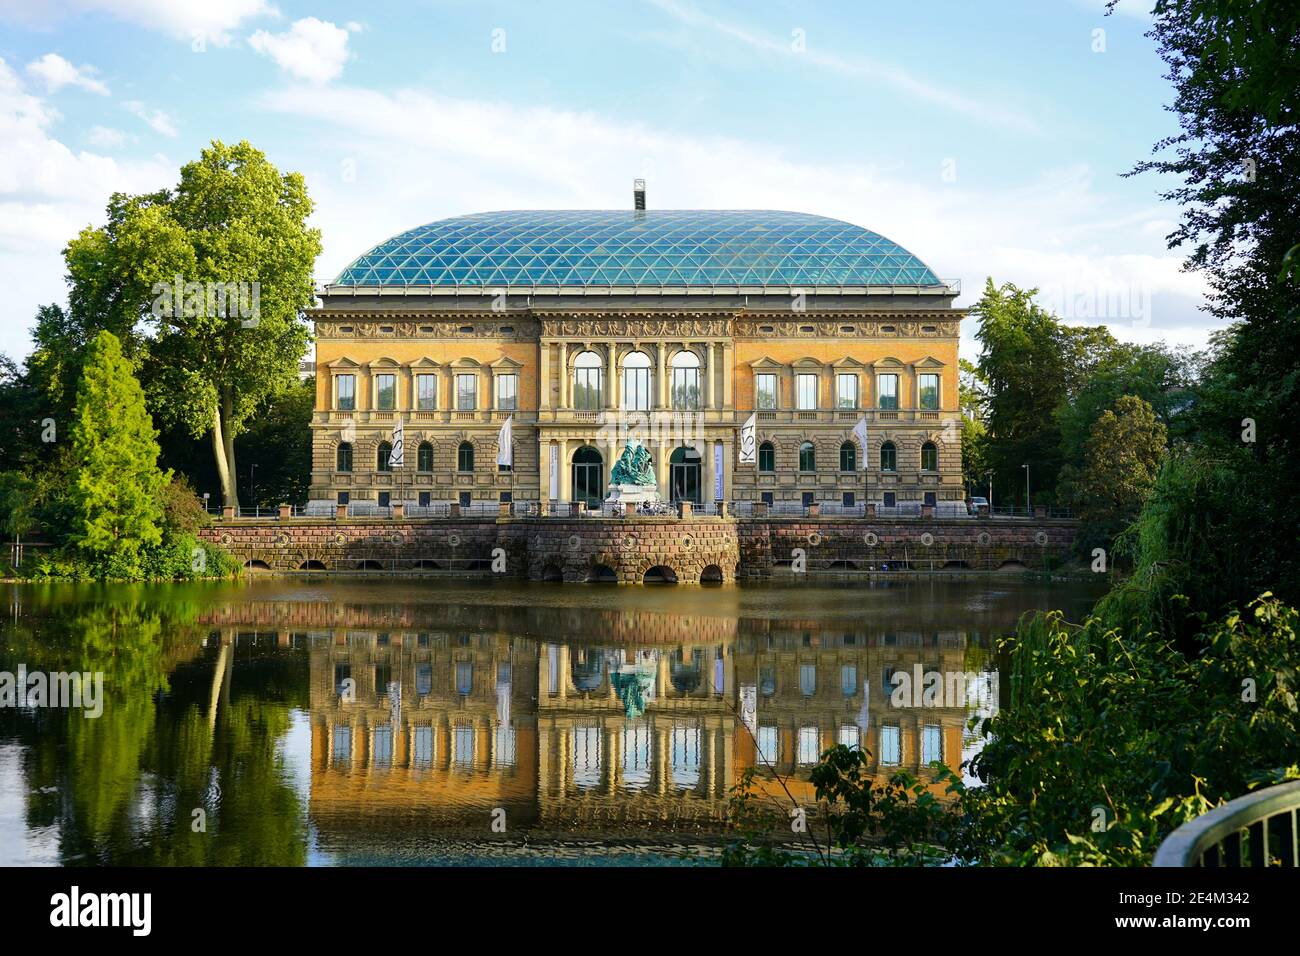 Panoramic view of the K21 museum of contemporary art (formerly „Ständehaus“ building), built 1876 - 1880, at 'Kaiserteich' (Emperor's Pond). Stock Photo